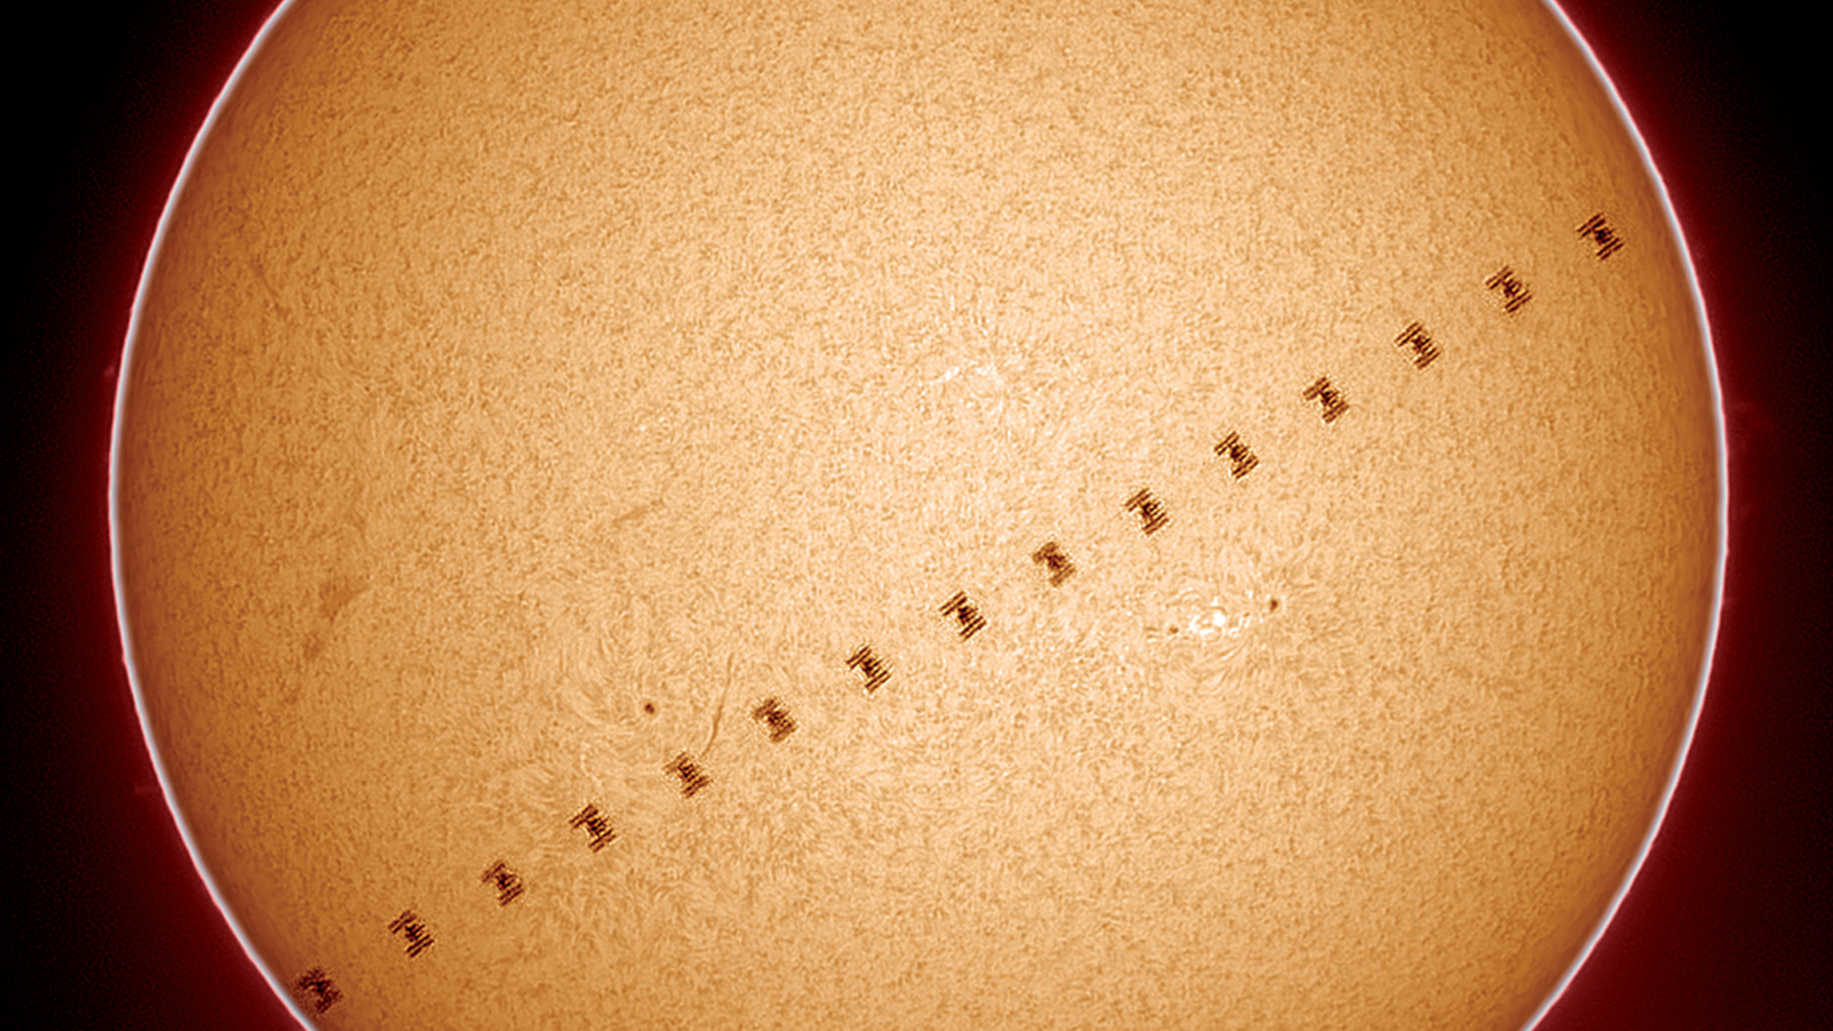 Space station passing in front of the Sun. Equipment and preparation.